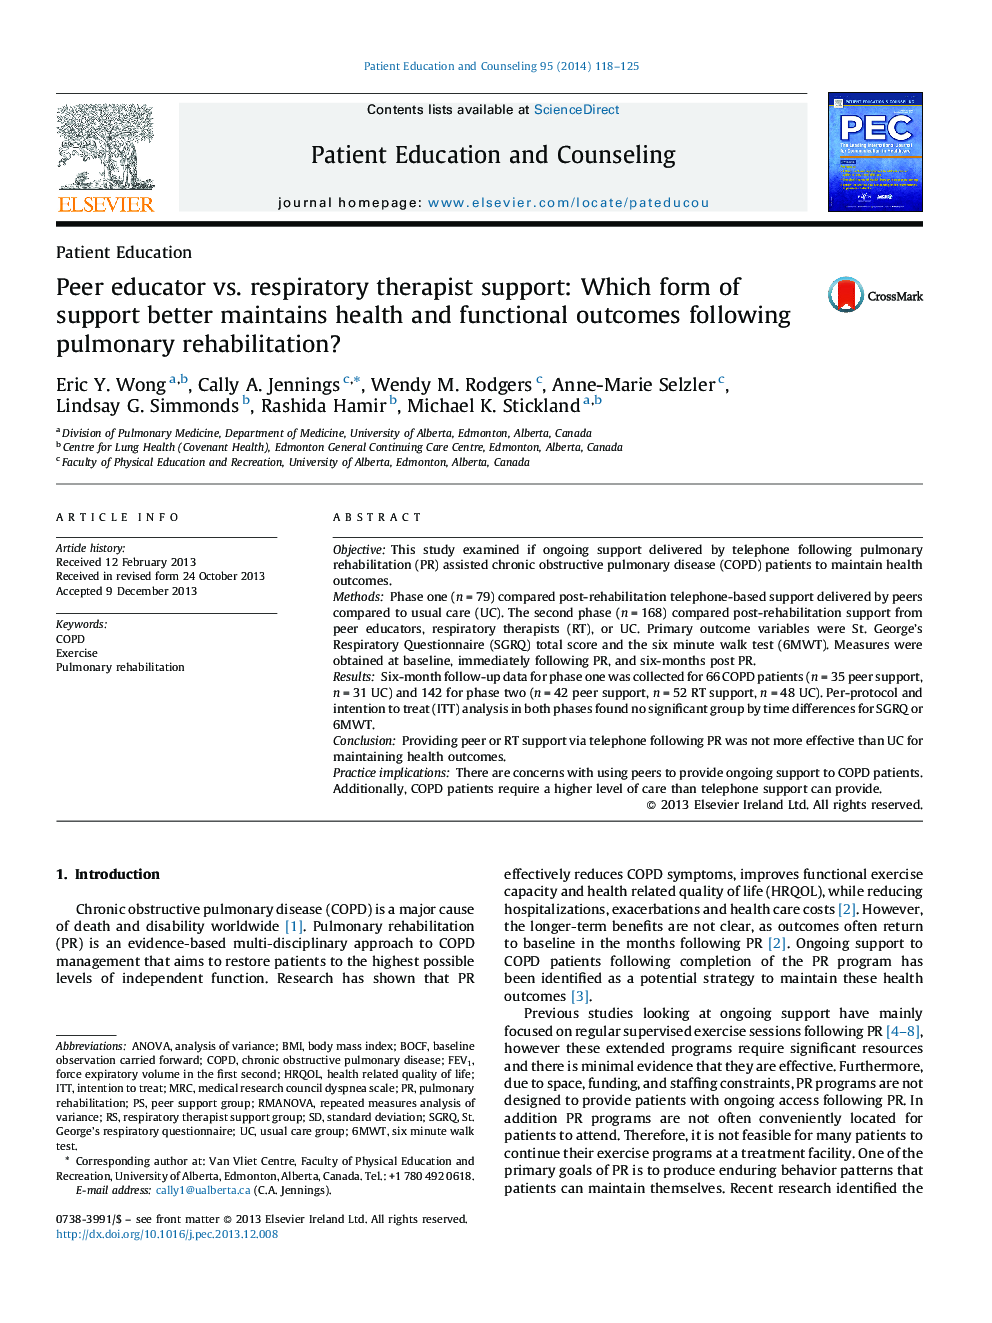 Peer educator vs. respiratory therapist support: Which form of support better maintains health and functional outcomes following pulmonary rehabilitation?